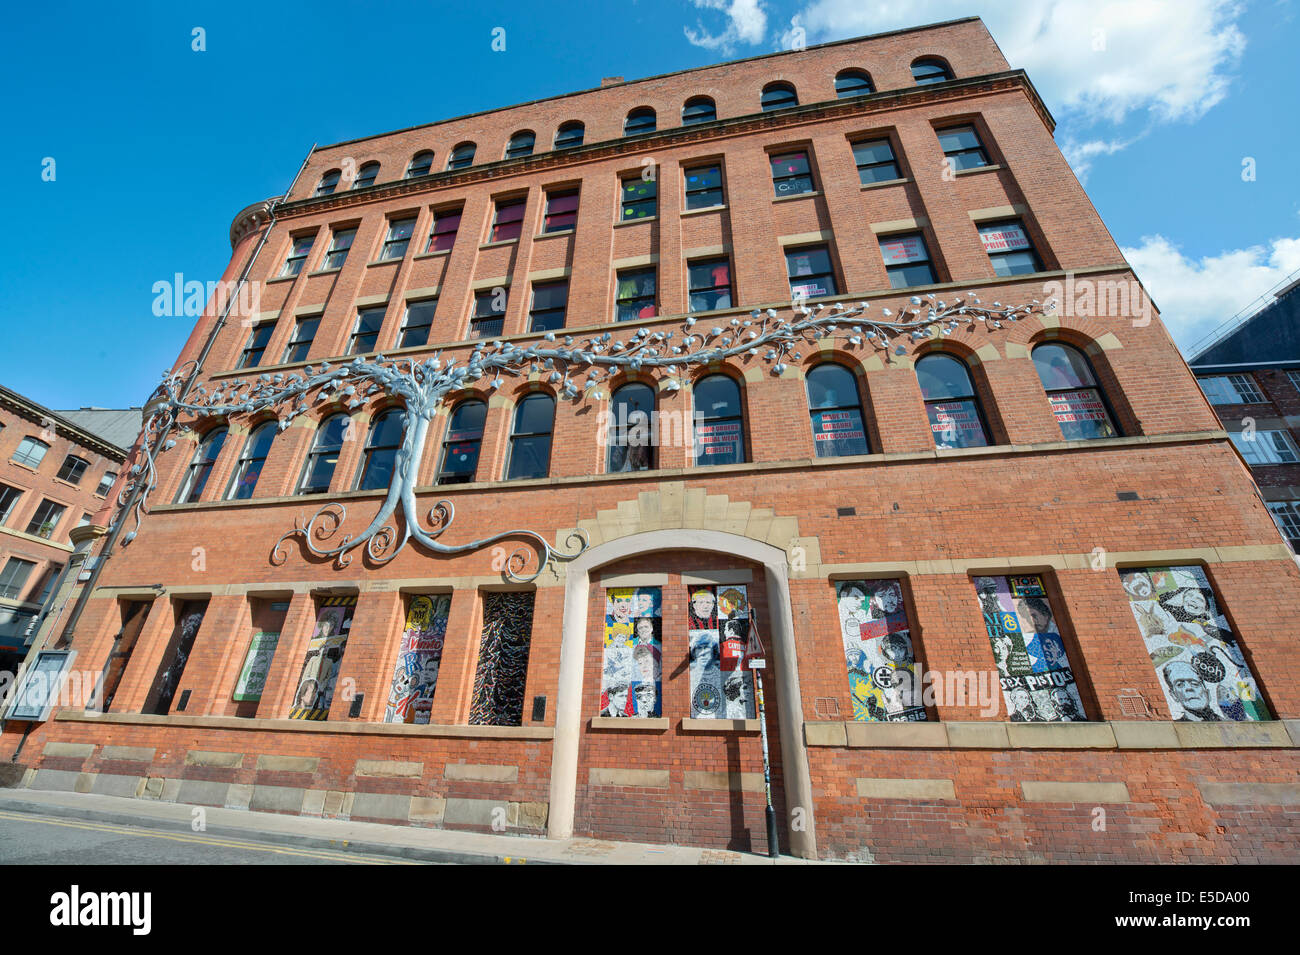 The Tib Street side of Afflecks (formerly Affleck's Palace) indoor market building located in the Northern Quarter of Manchester Stock Photo